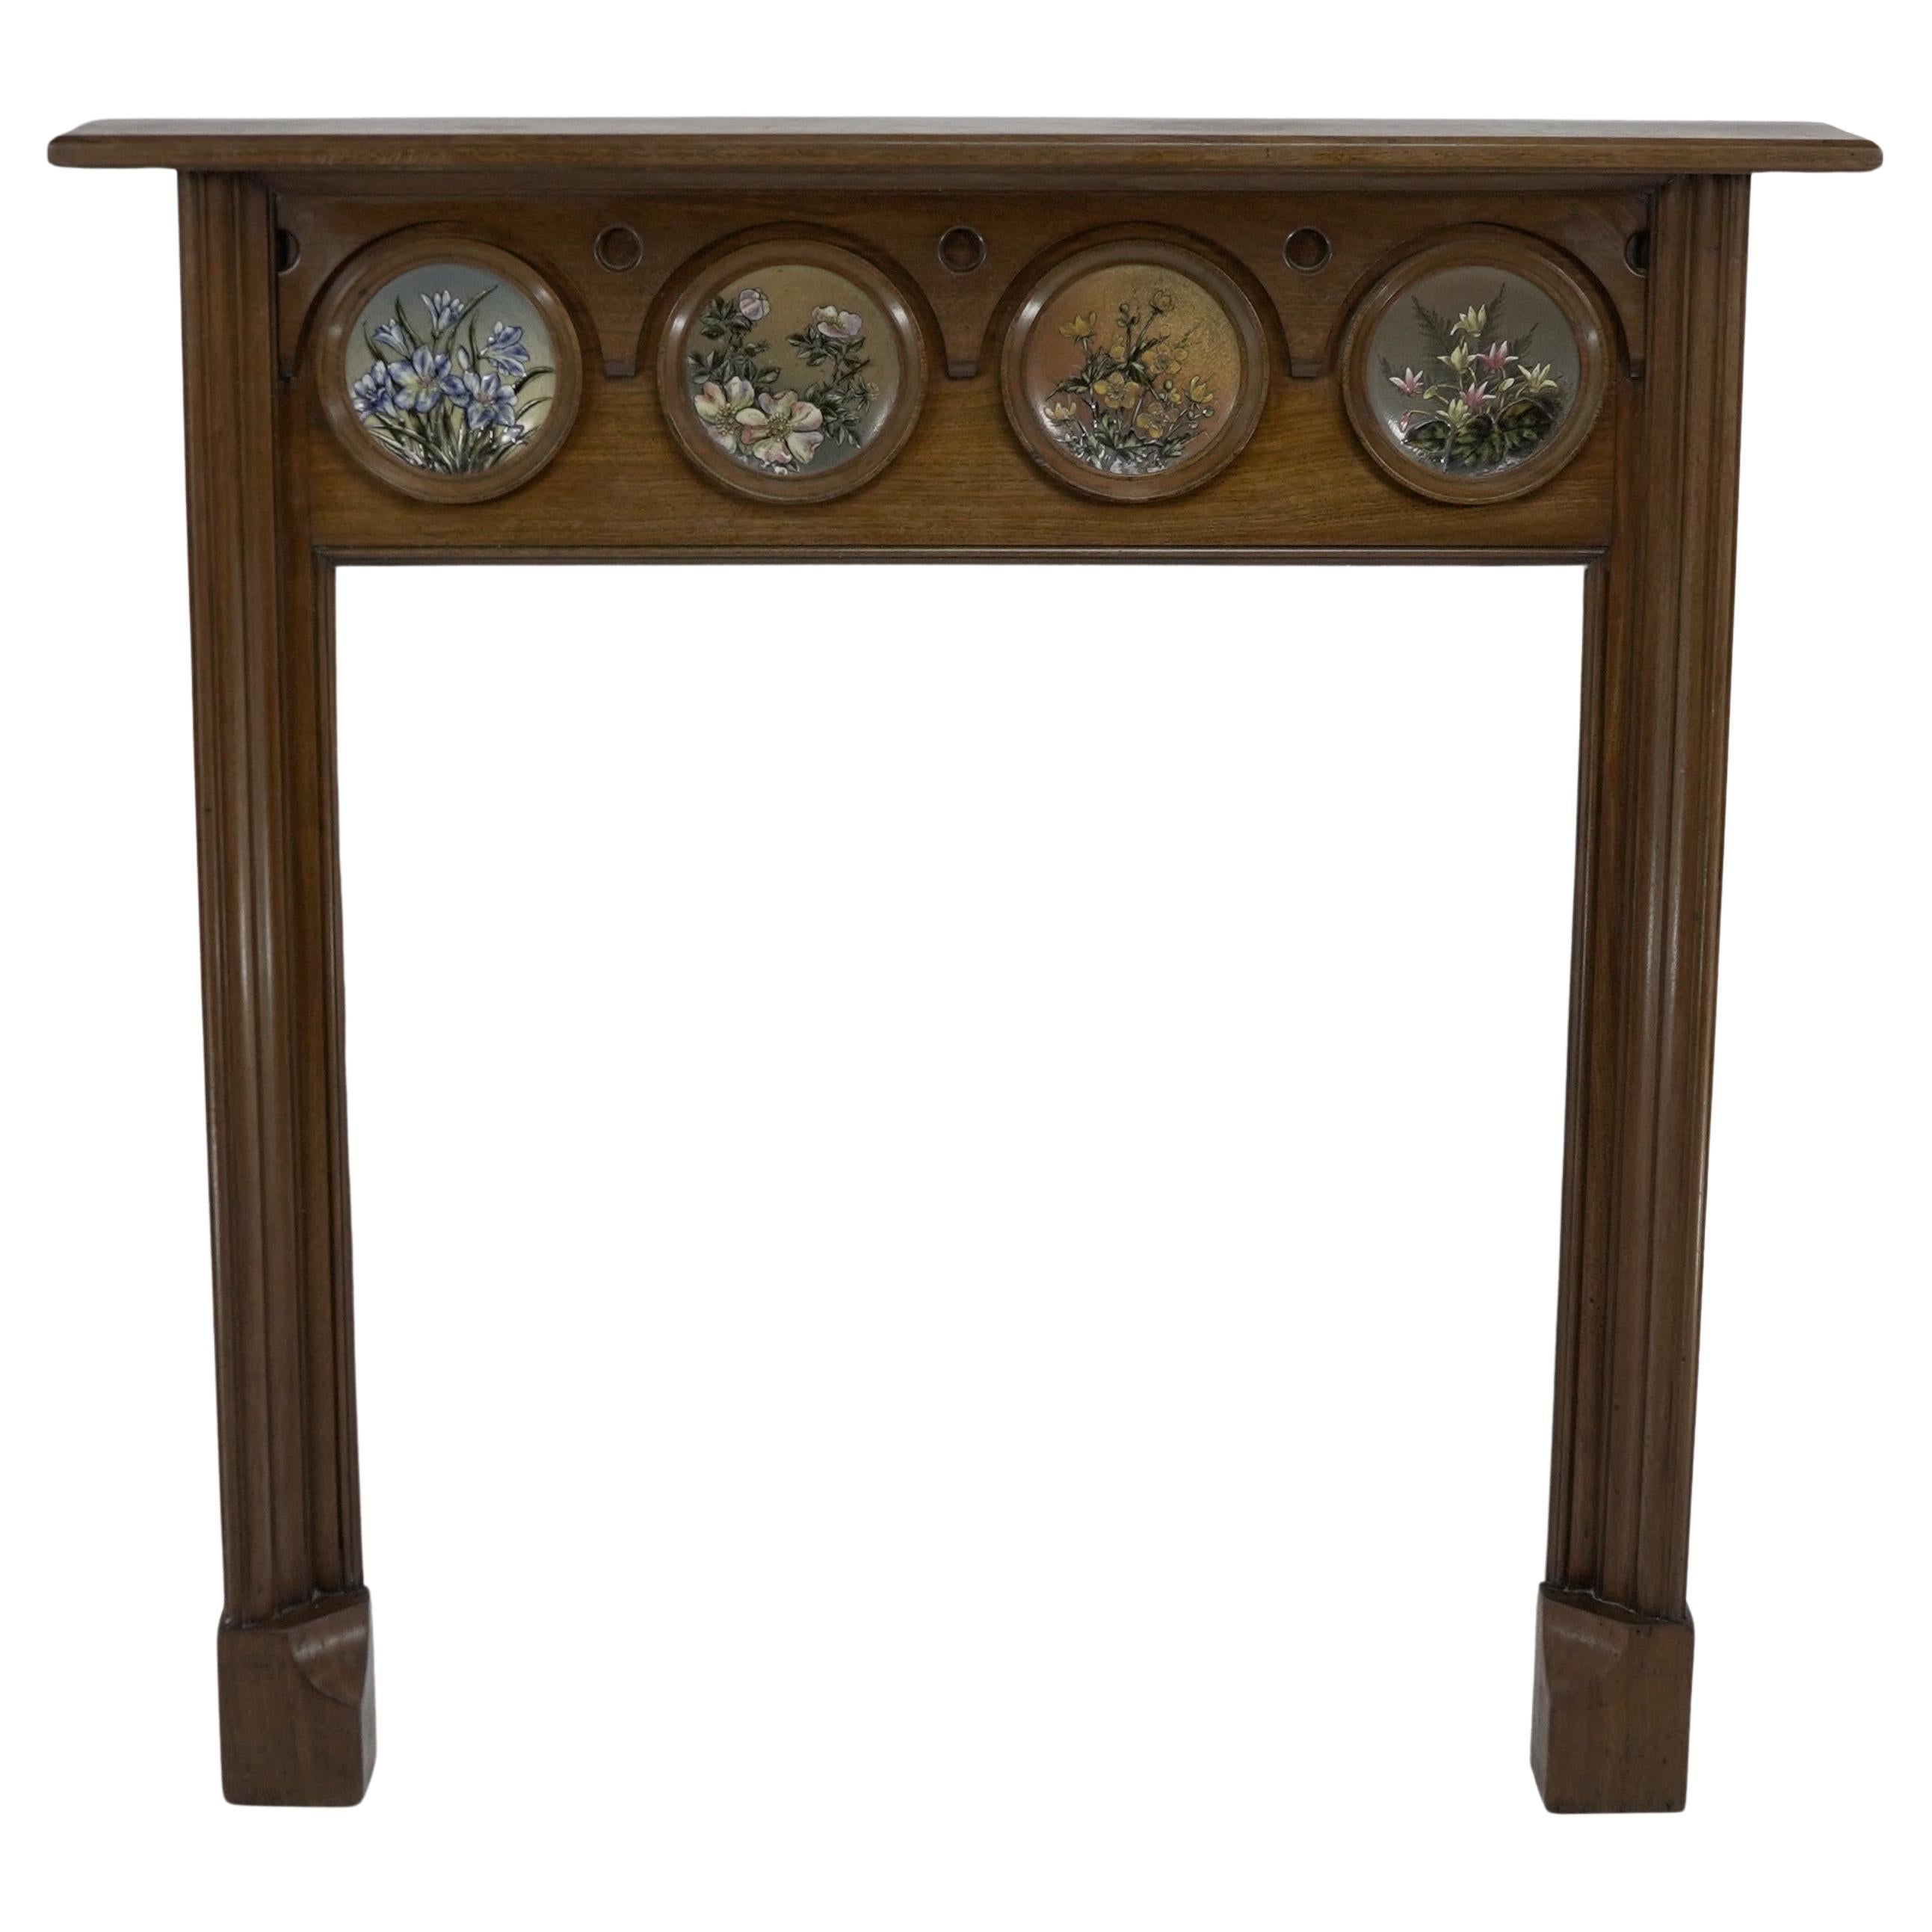 Christopher Dresser Fireplaces and Mantels